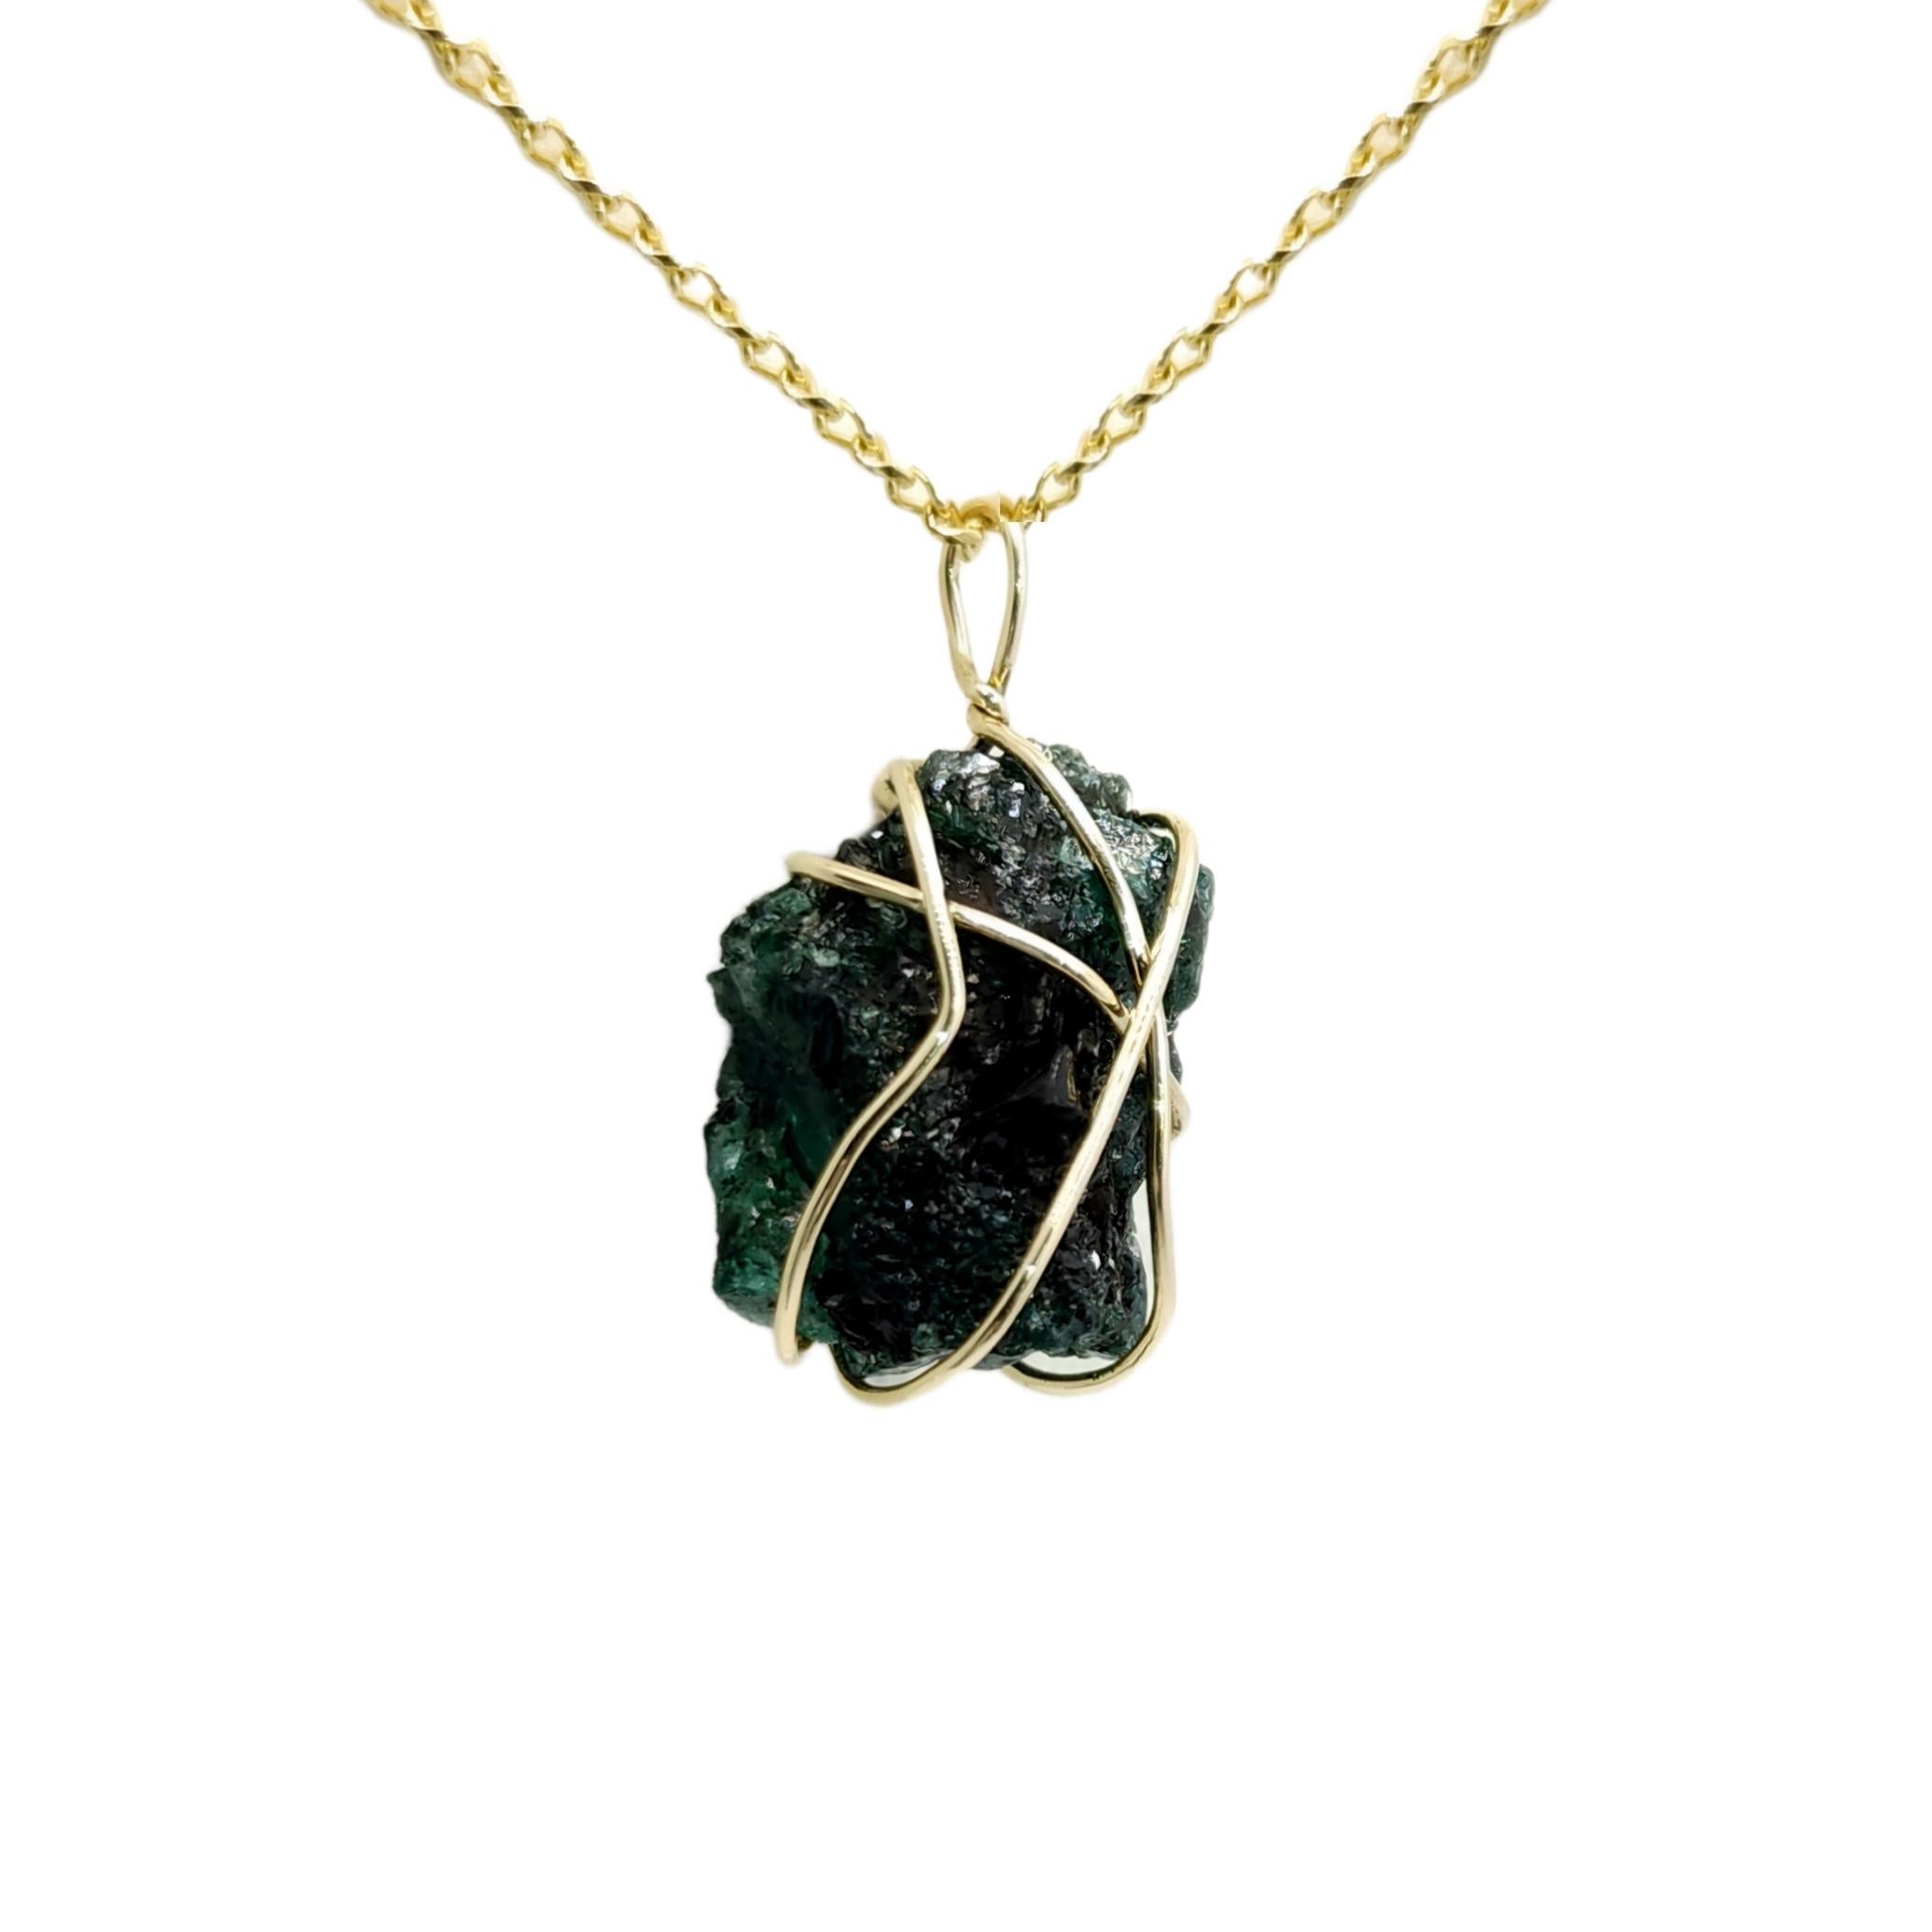 Natural 10.00Ct Raw Emerald Gemstone Gold Handmade Pendant and Necklace

Product Description:

Introducing our Emerald Gold Handmade Pendant , a symbol of organic beauty and artisan elegance. Featuring a 10.00Ct raw emerald gemstone set in